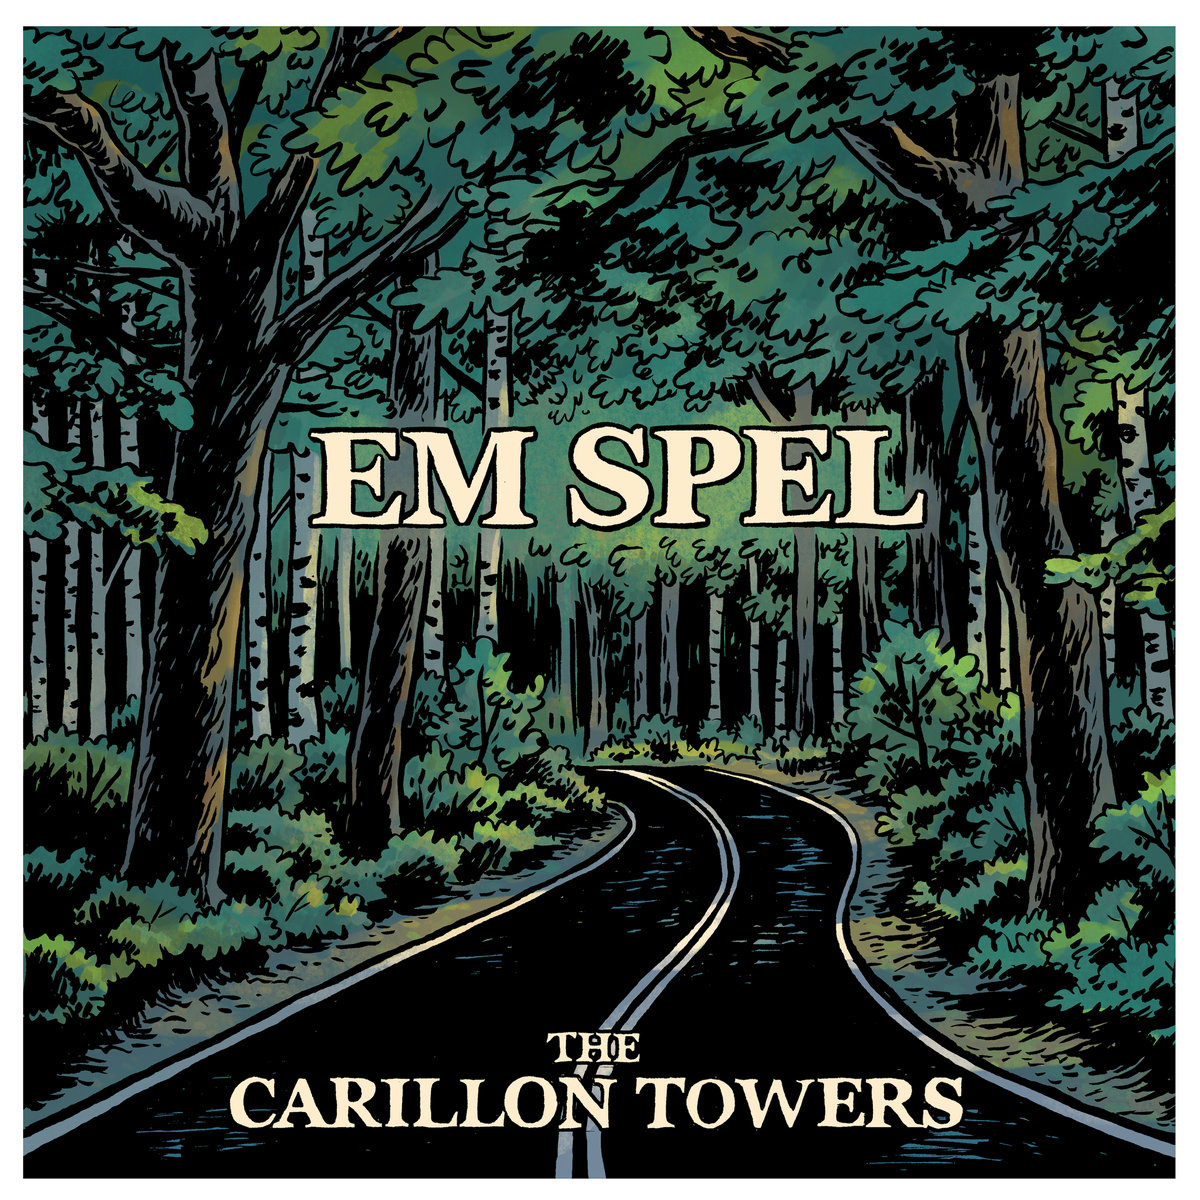 artwork for The Carillon Towers by Em Spel